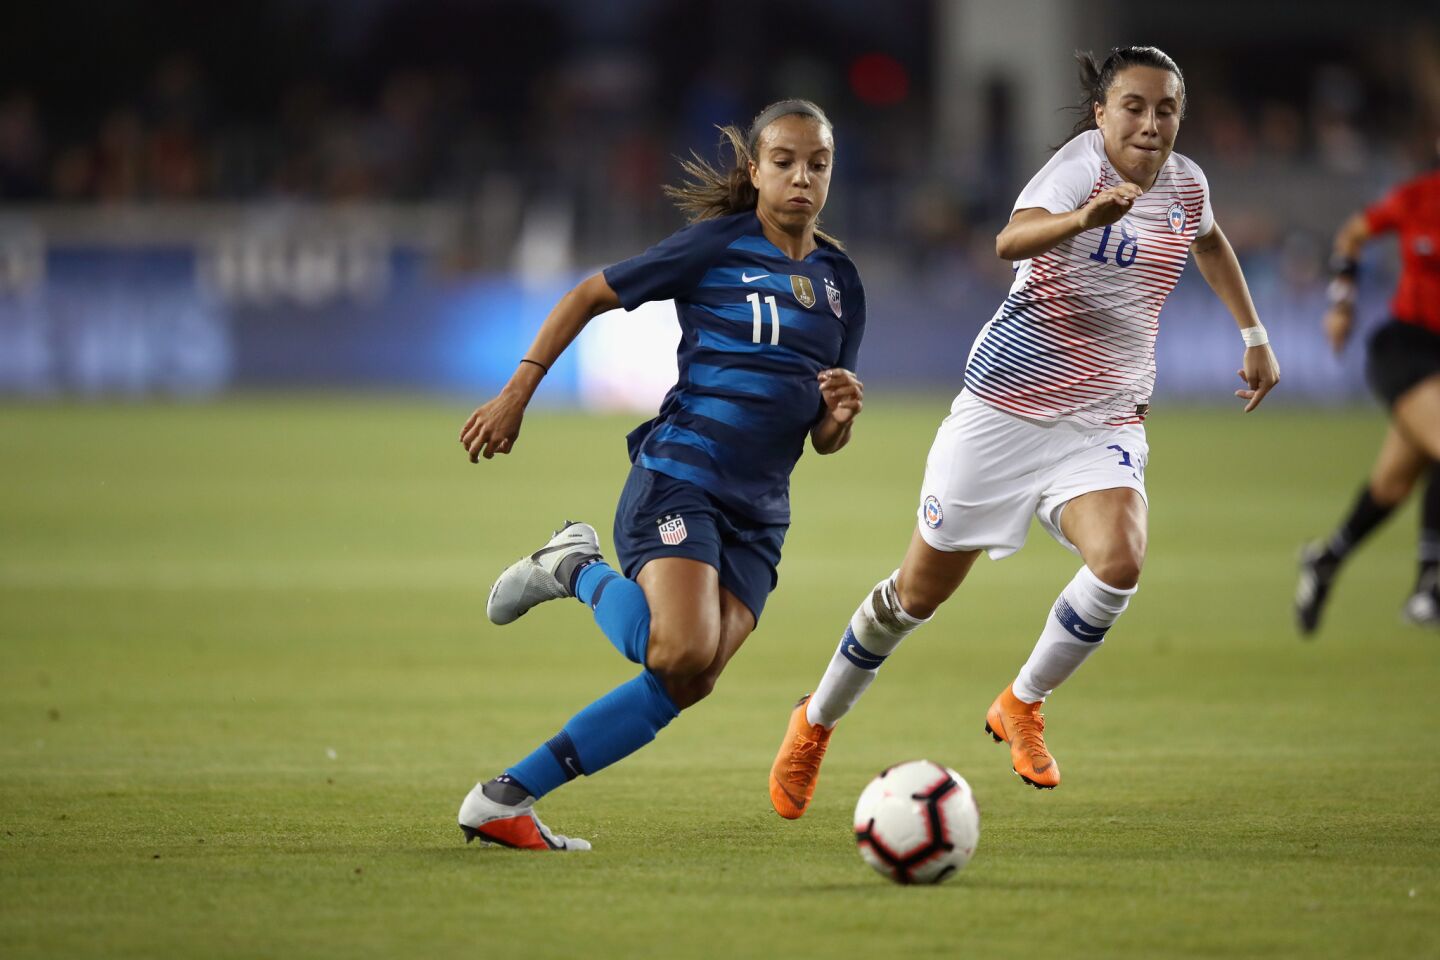 SAN JOSE, CA - SEPTEMBER 04: Mallory Pugh of the United States dribbles away from Camila Saez of Chile during their match at Avaya Stadium on September 4, 2018 in San Jose, California. (Photo by Ezra Shaw/Getty Images) ** OUTS - ELSENT, FPG, CM - OUTS * NM, PH, VA if sourced by CT, LA or MoD **